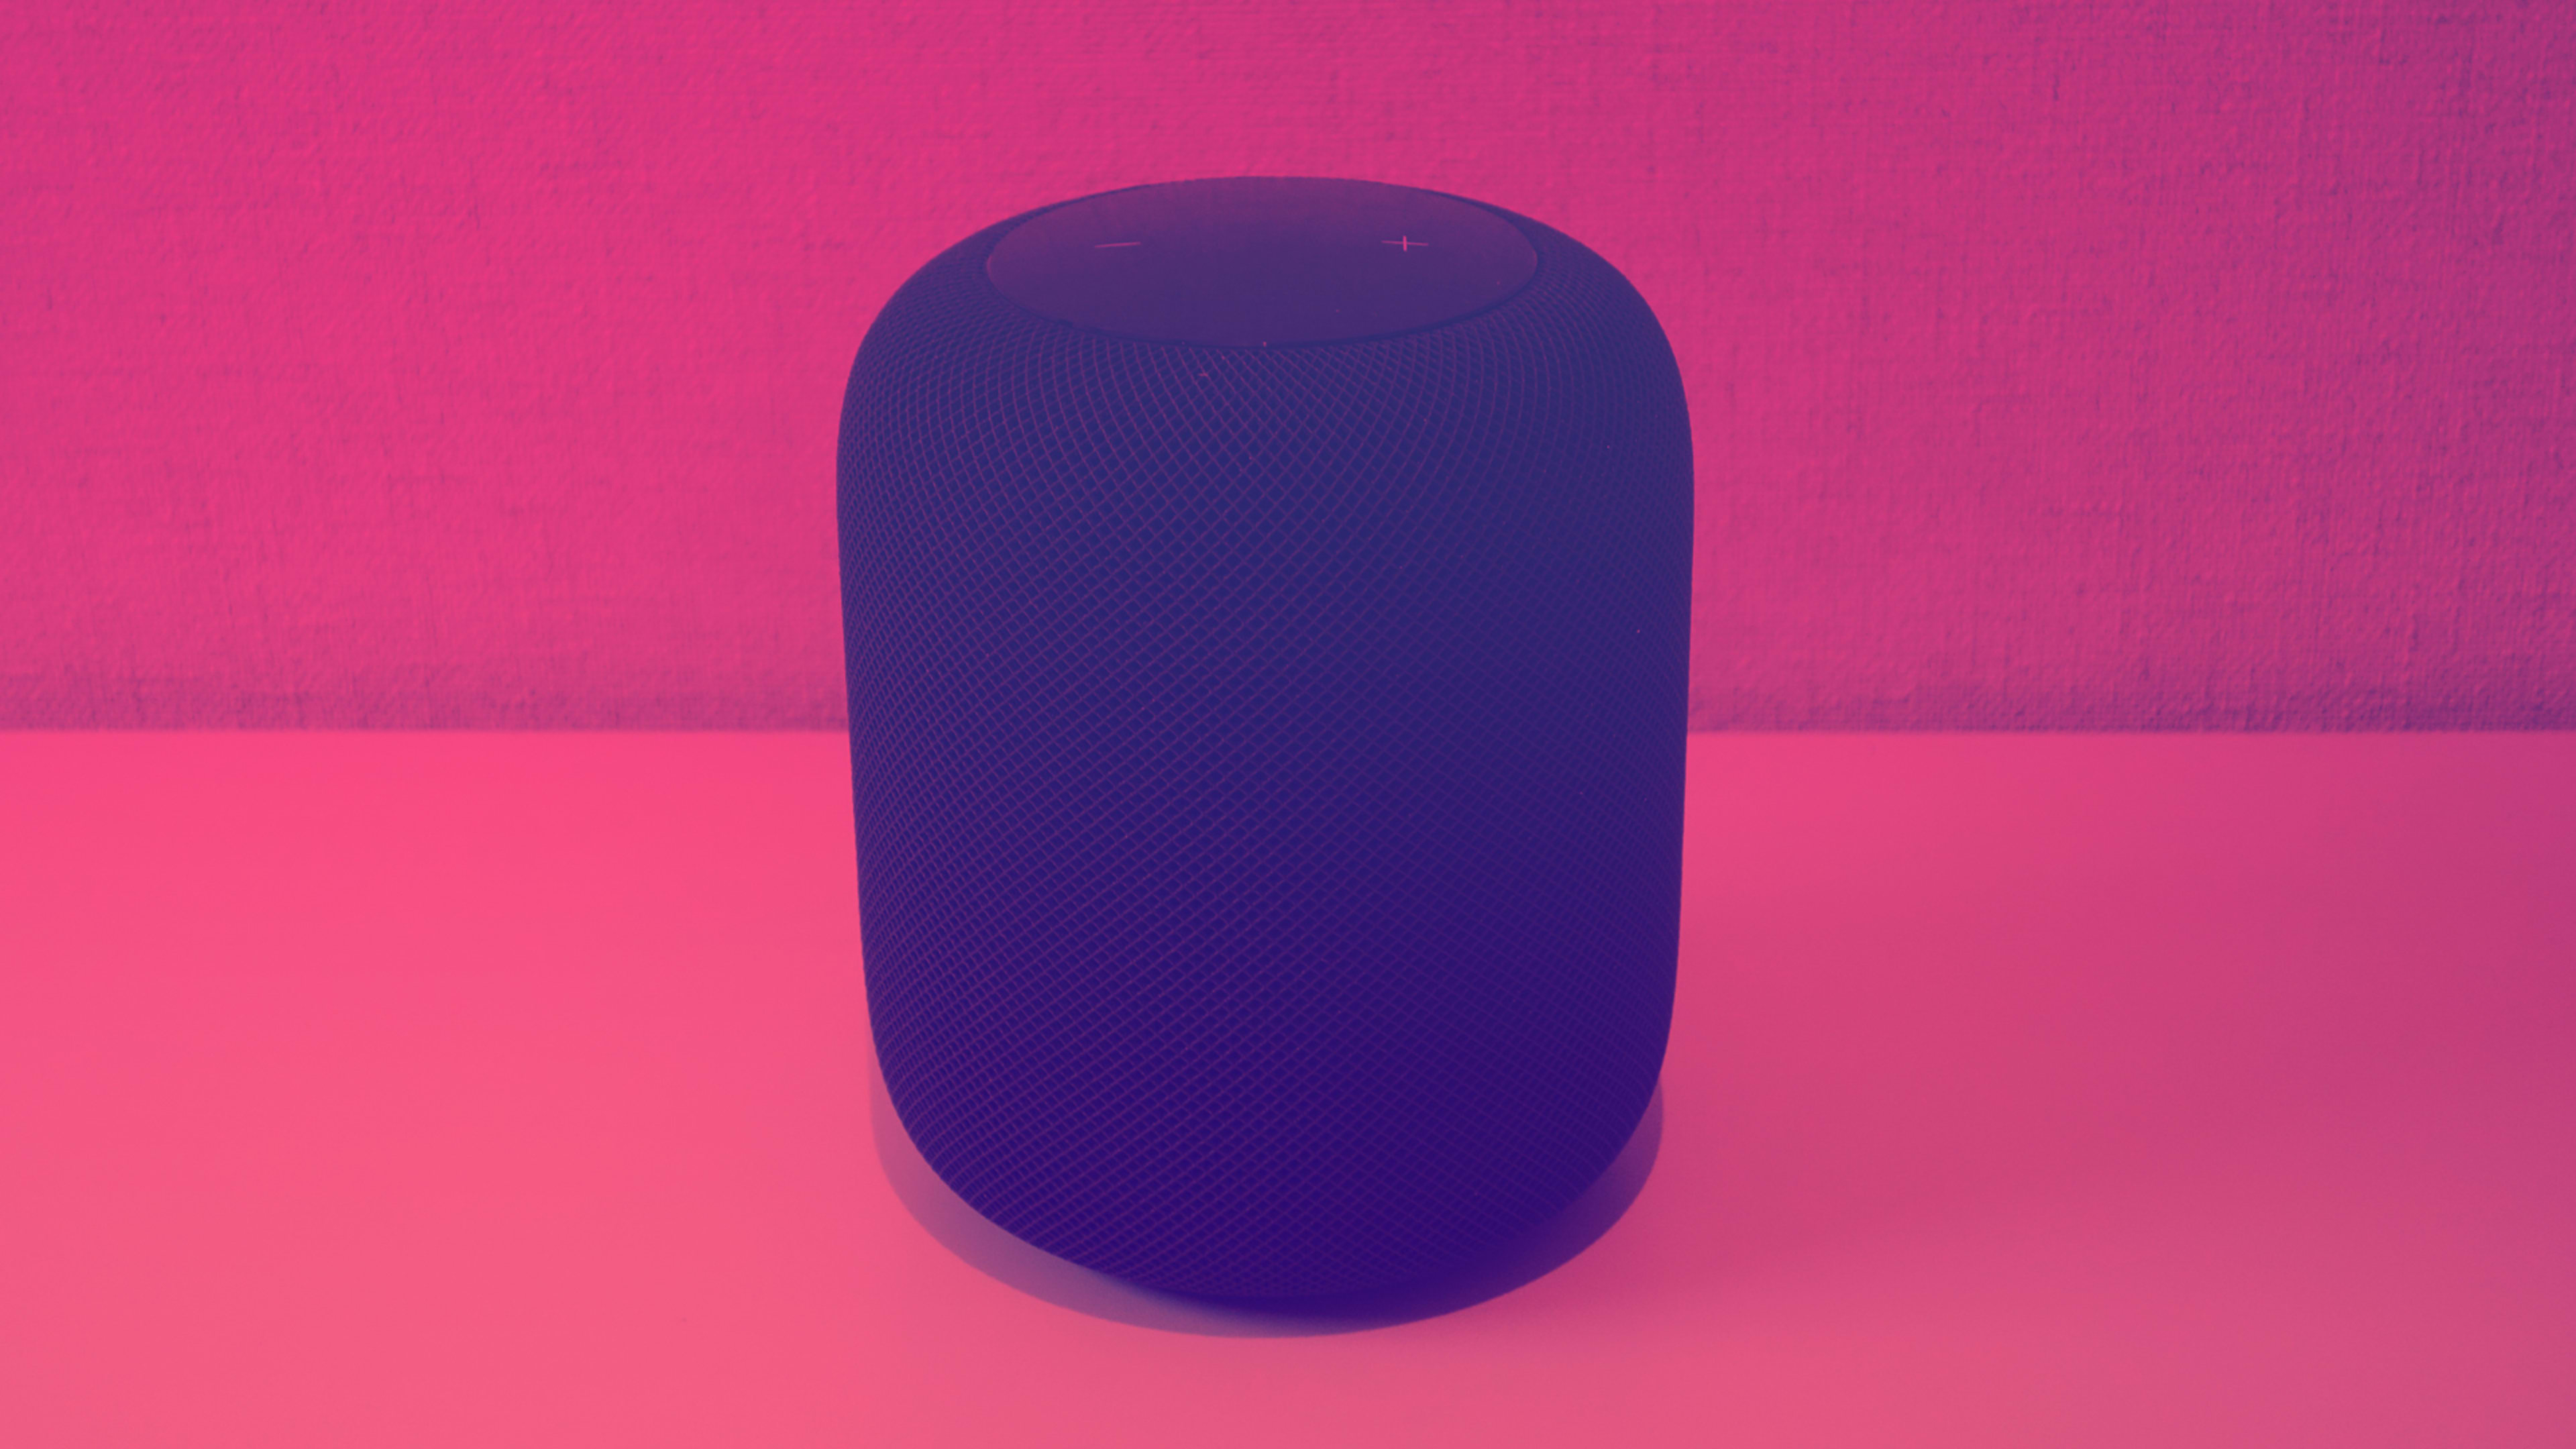 Why Apple’s HomePod May Be Flopping